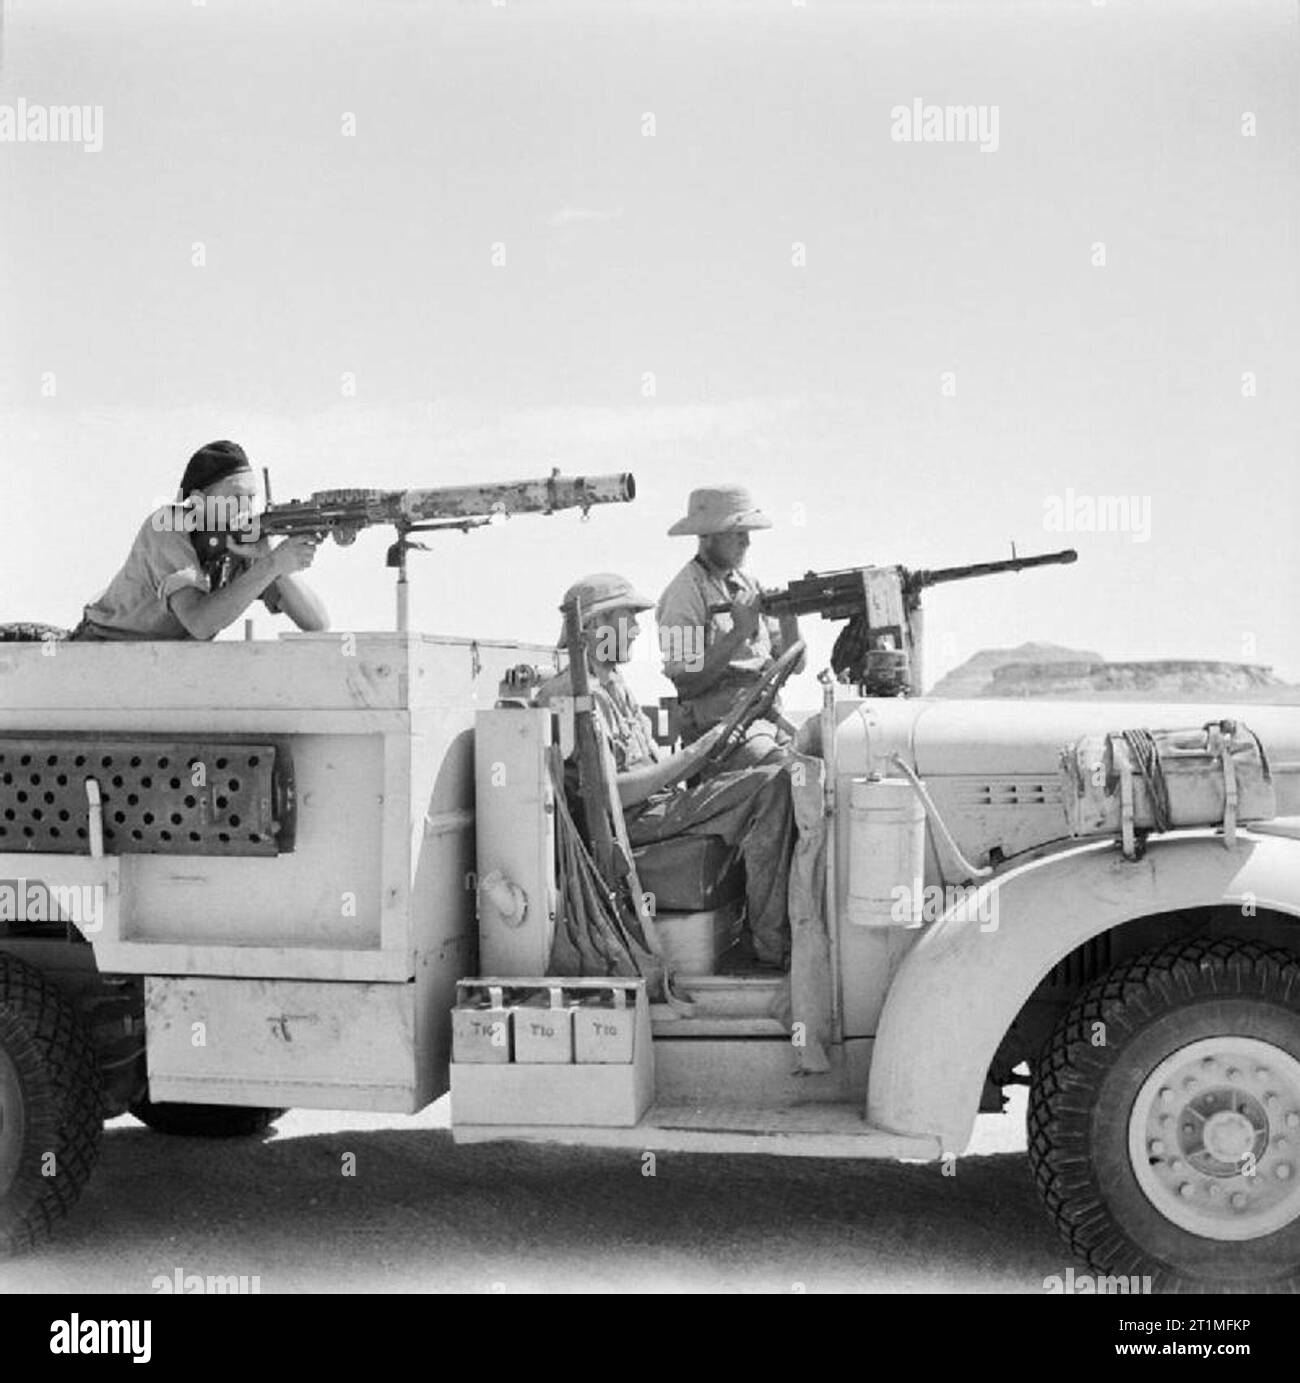 The Long Range Desert Group (lrdg) during the Second World War A posed close-up view of a Chevrolet truck and its three man crew in the Western Desert. The gunner beside the driver is manning an Italian Breda machine gun, while the soldier in the back is ready with the Lewis gun. Stock Photo